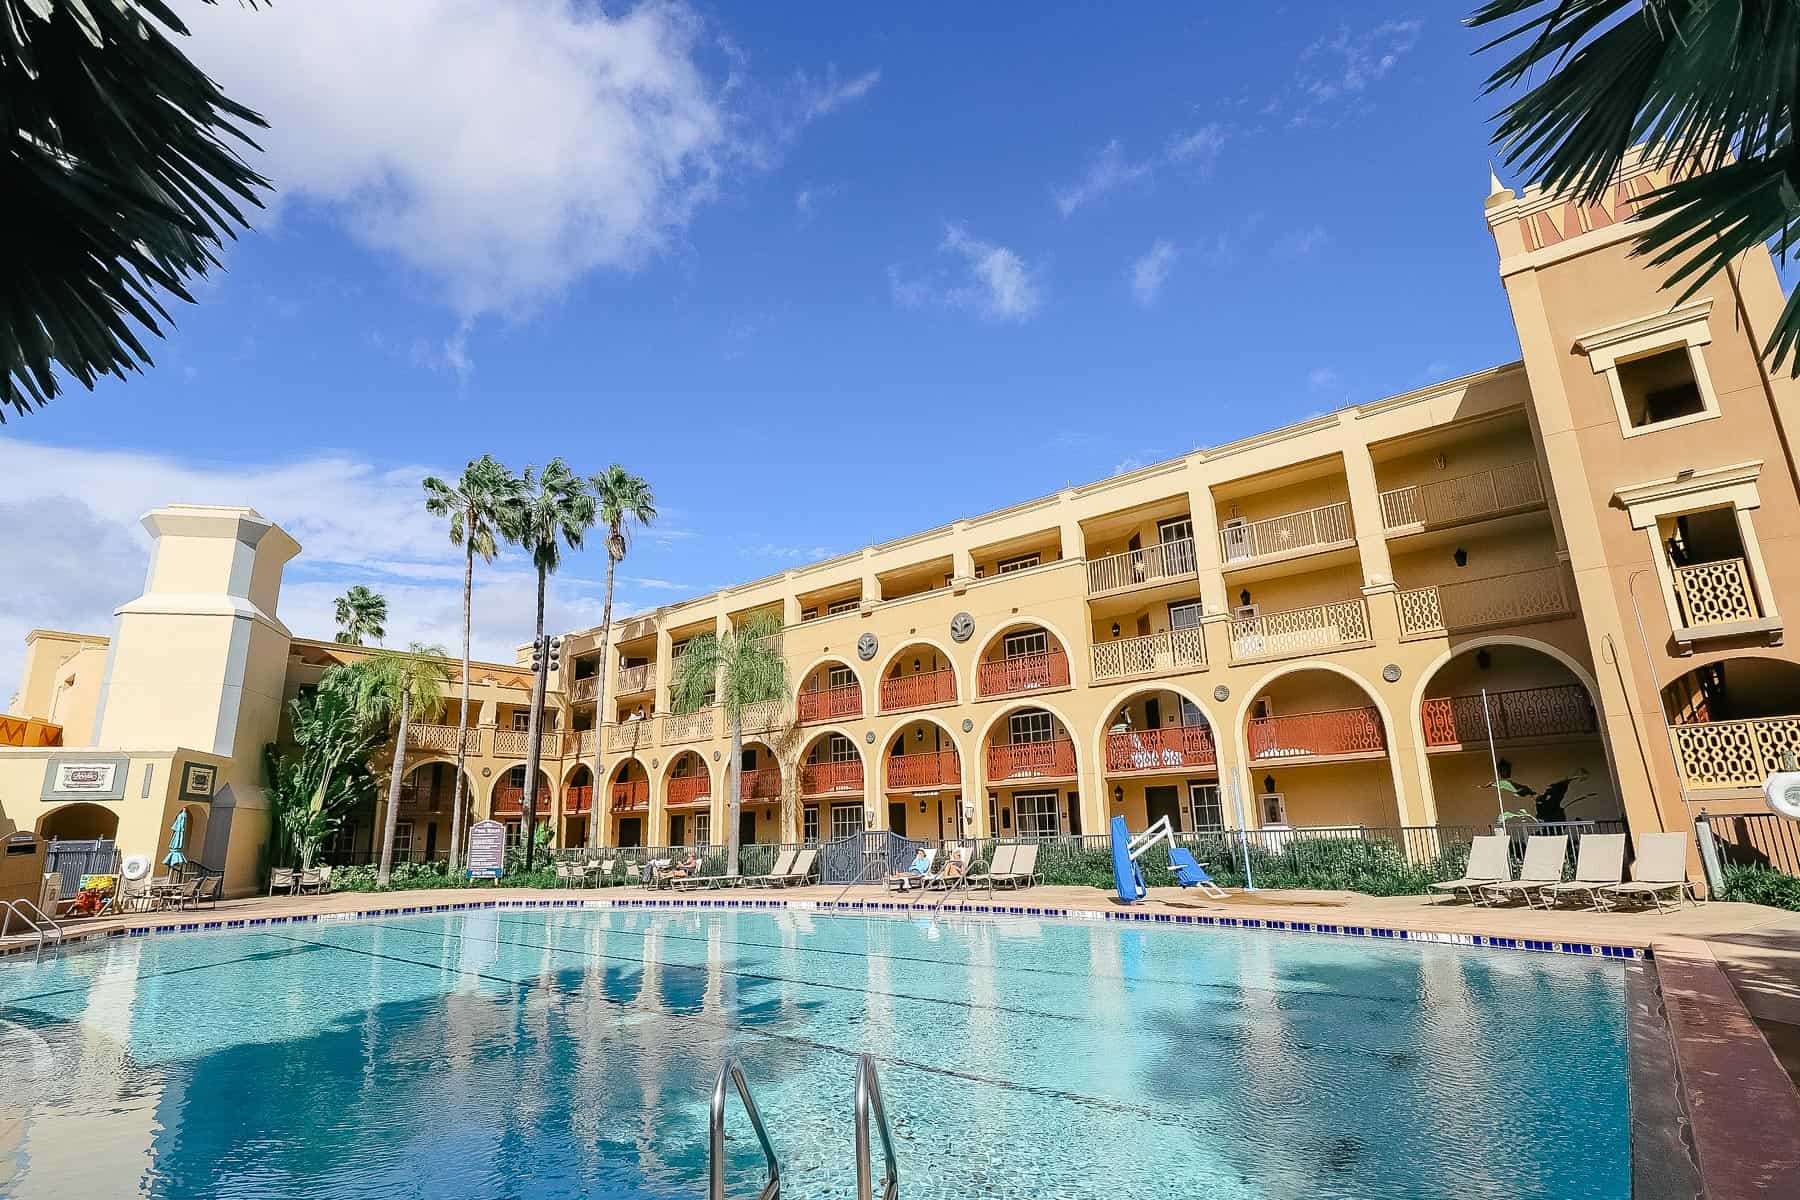 Coronado Springs with a pool and blue skies 